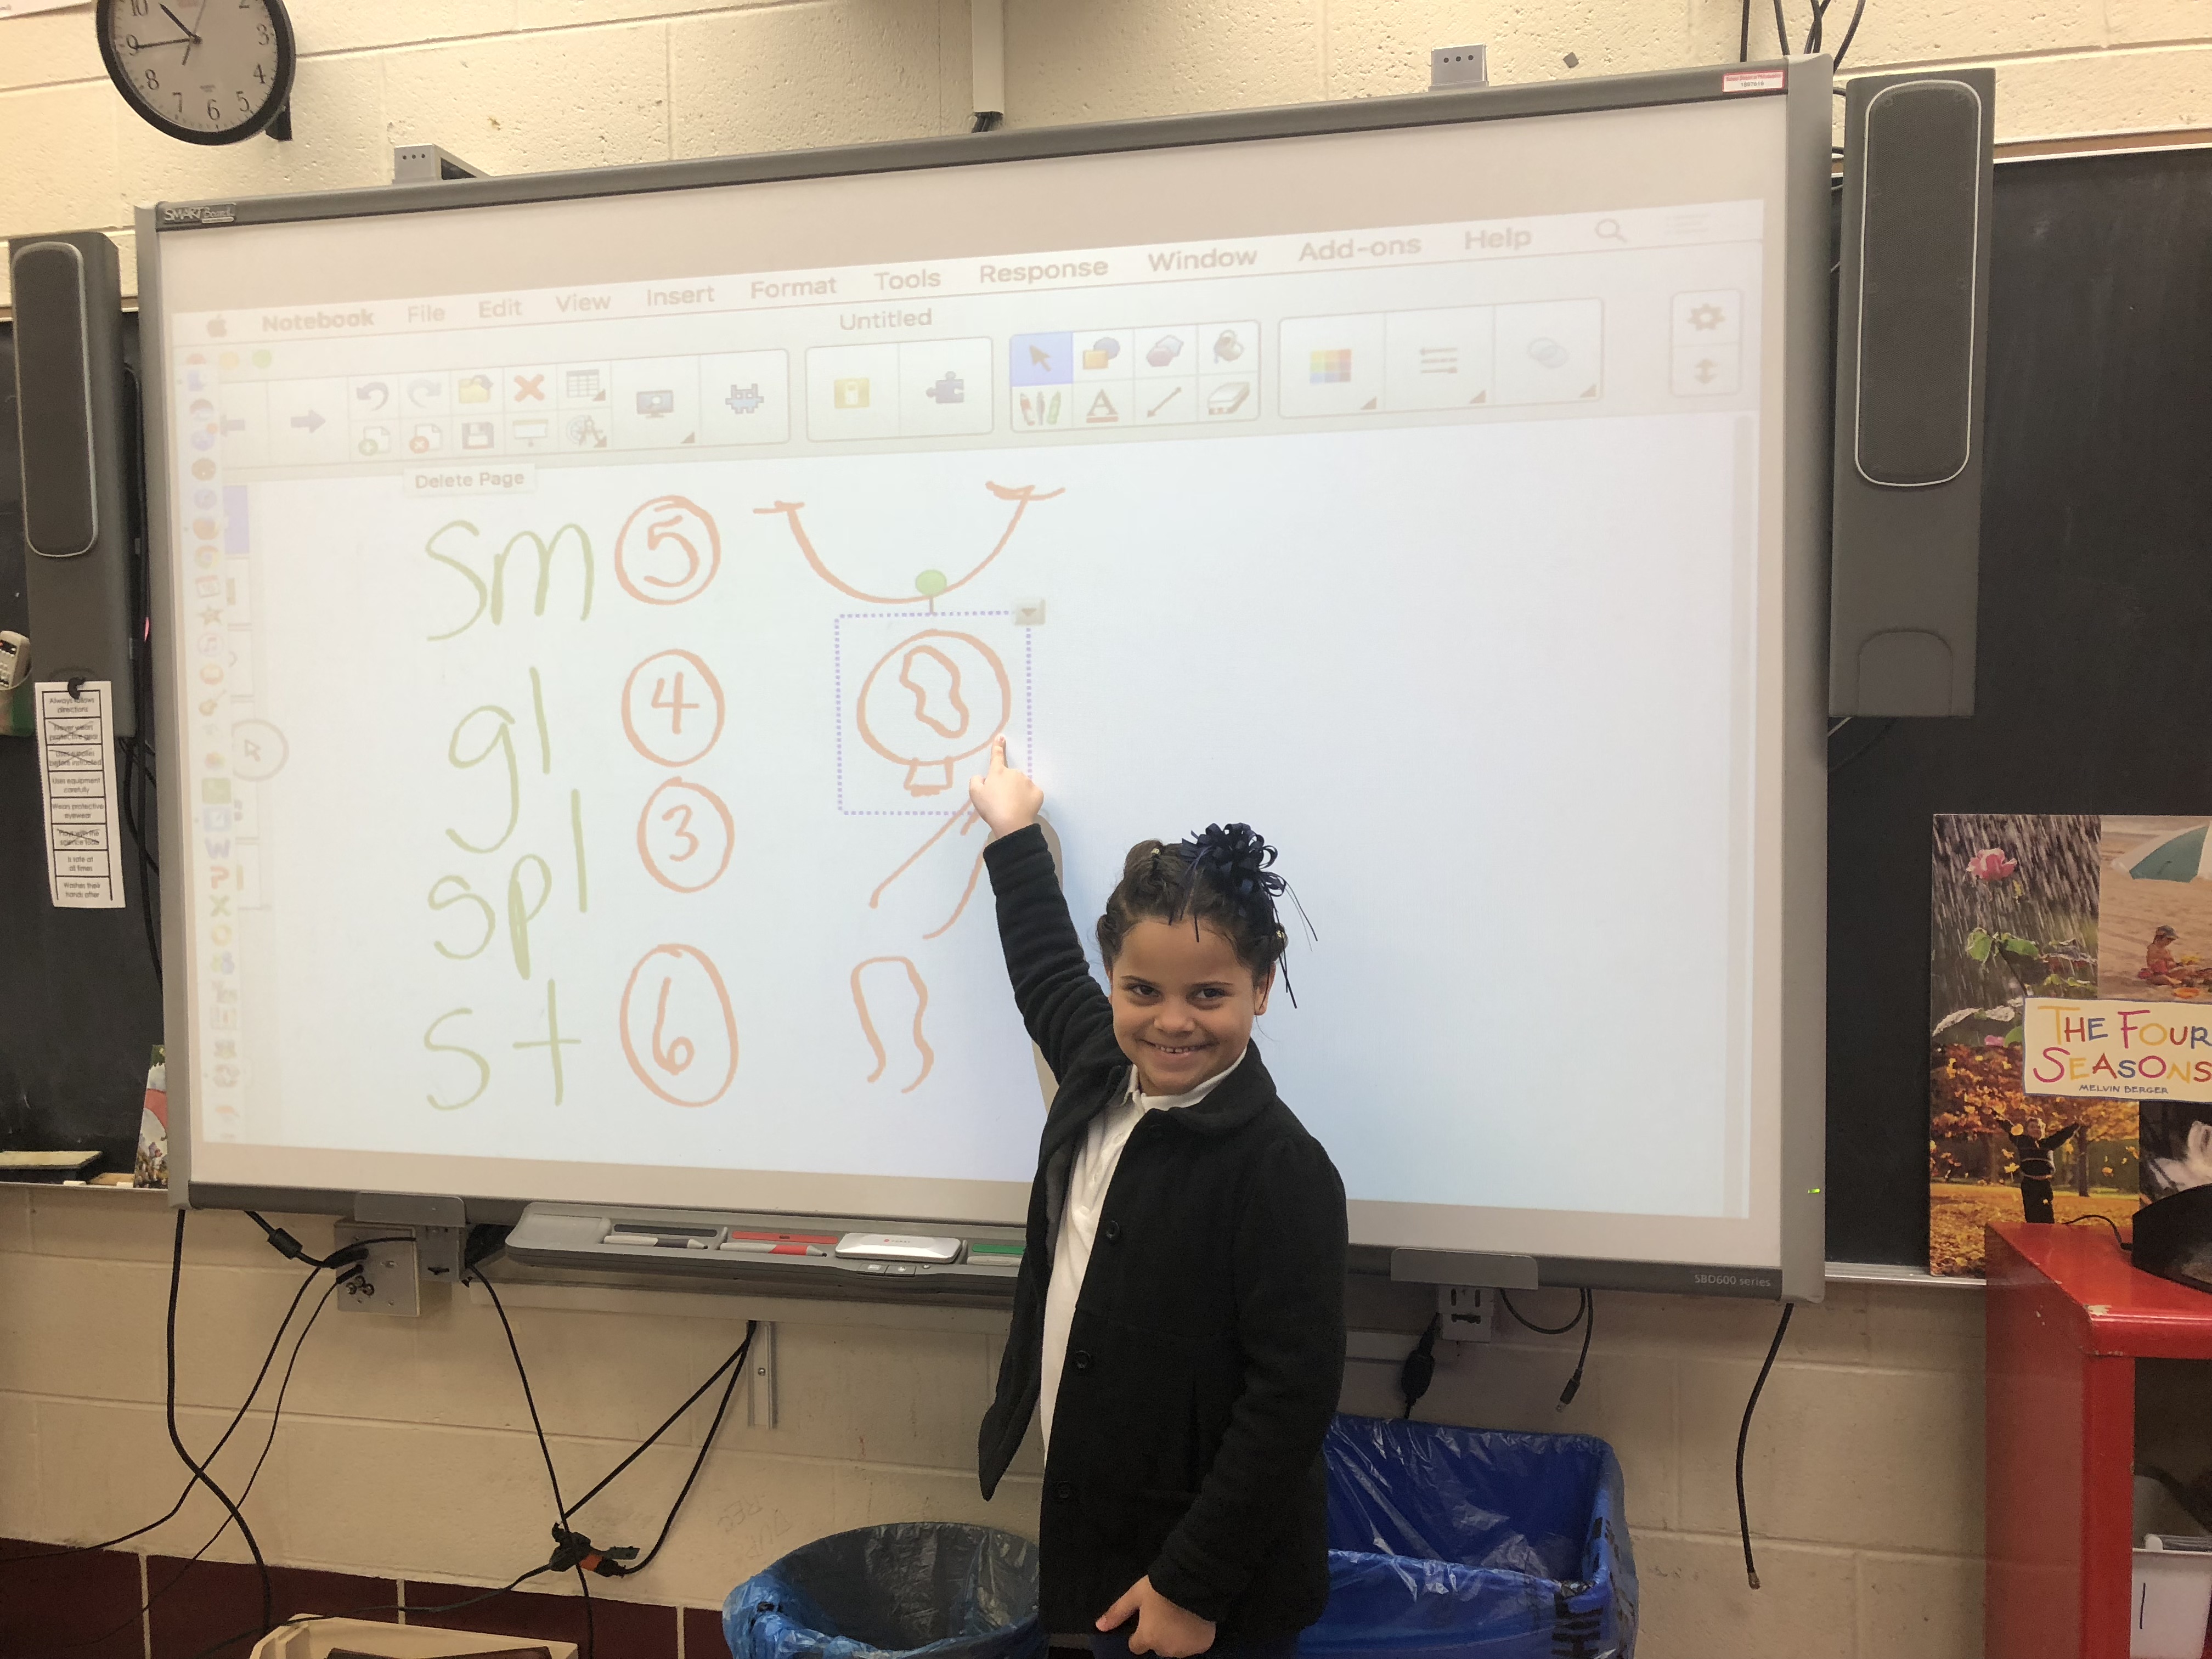 Student at SMART Board